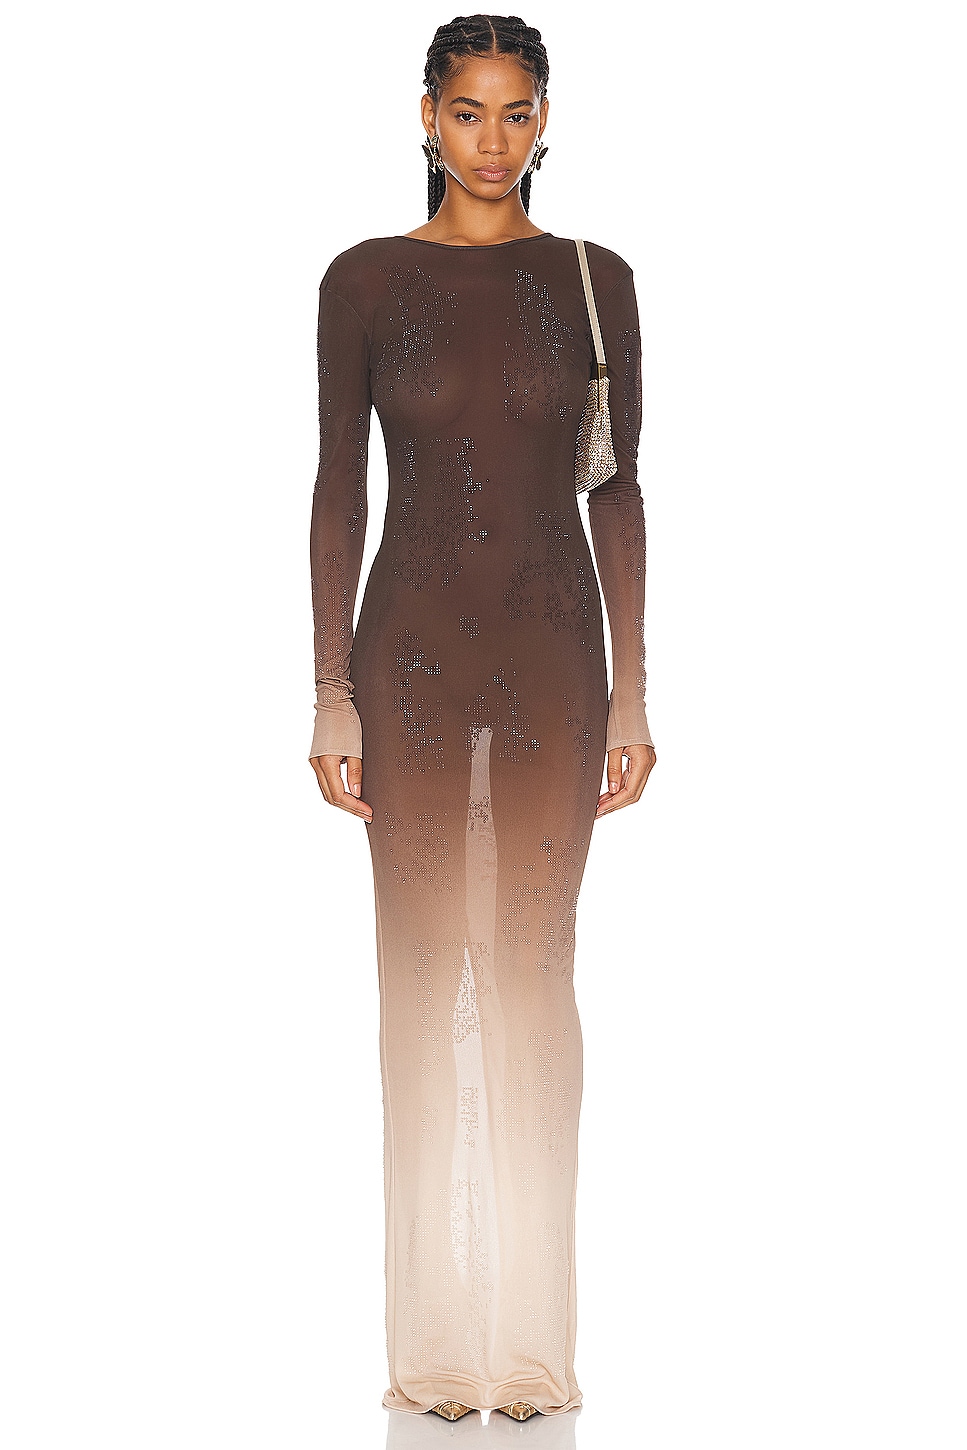 Image 1 of Andreadamo Destroyed Strass Jersey Long Dress in Nudes Degrade